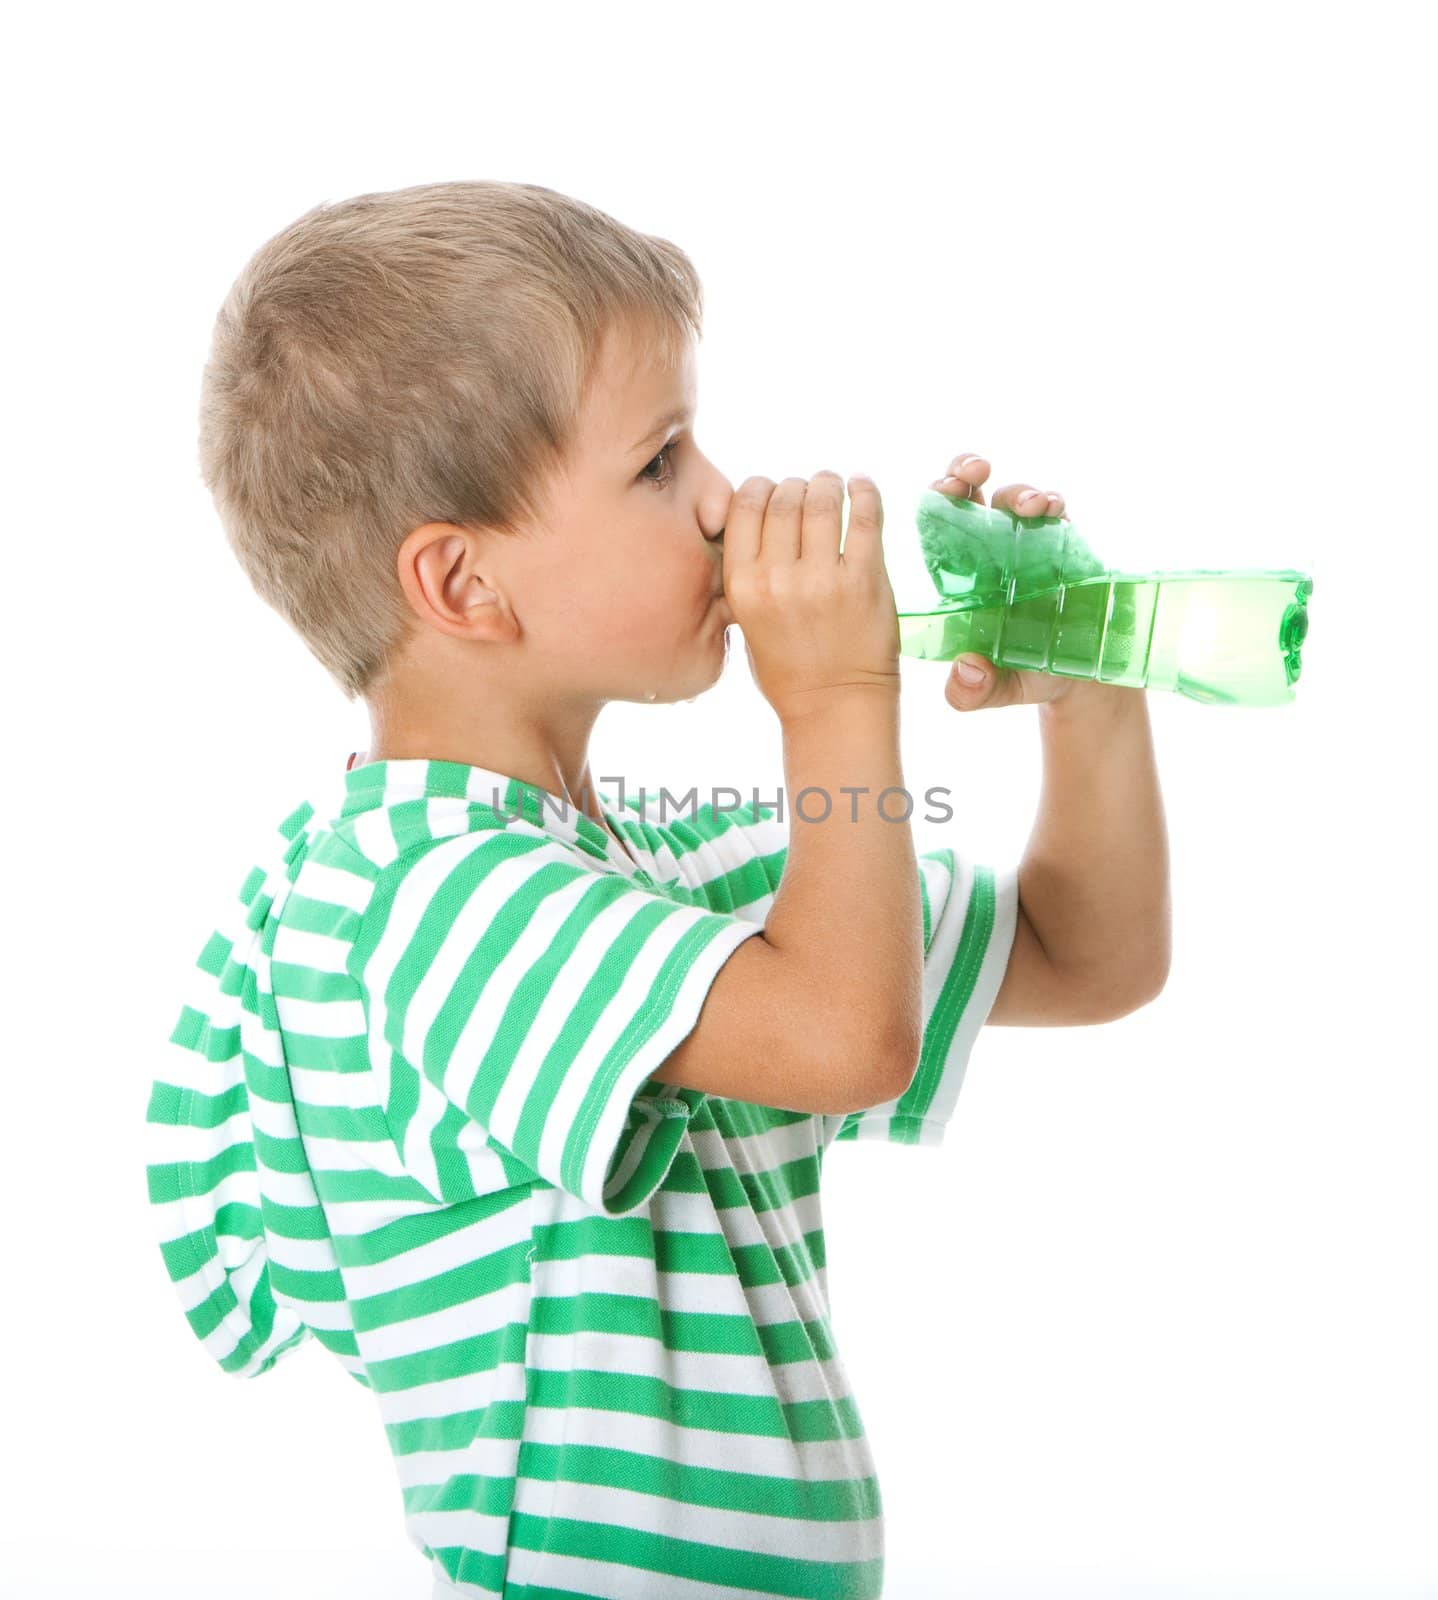 Boy drinking water isolated on white background